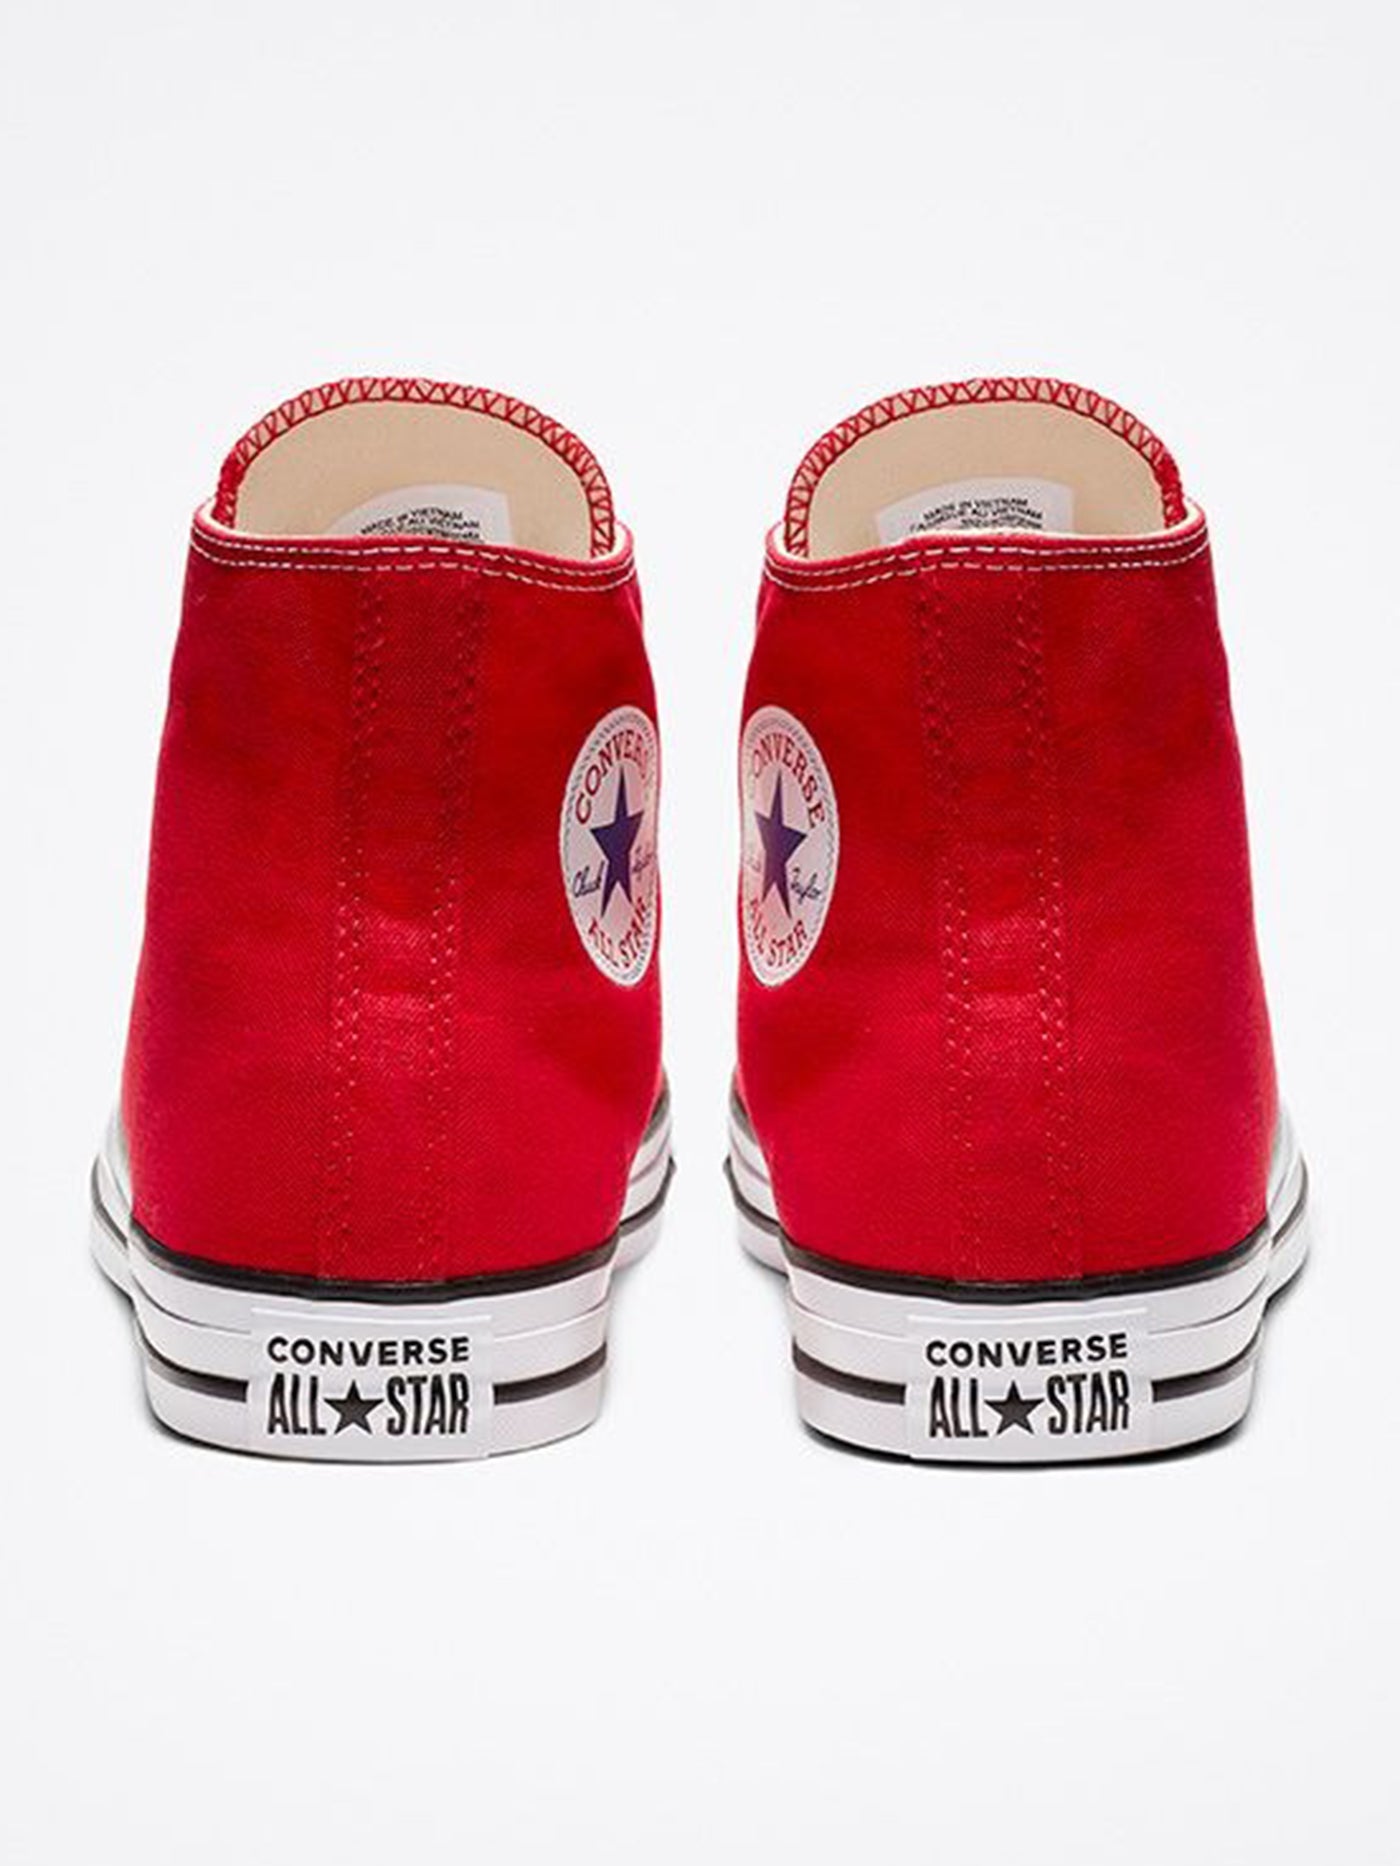 Converse Chuck Taylor All Star Hi Red Shoes